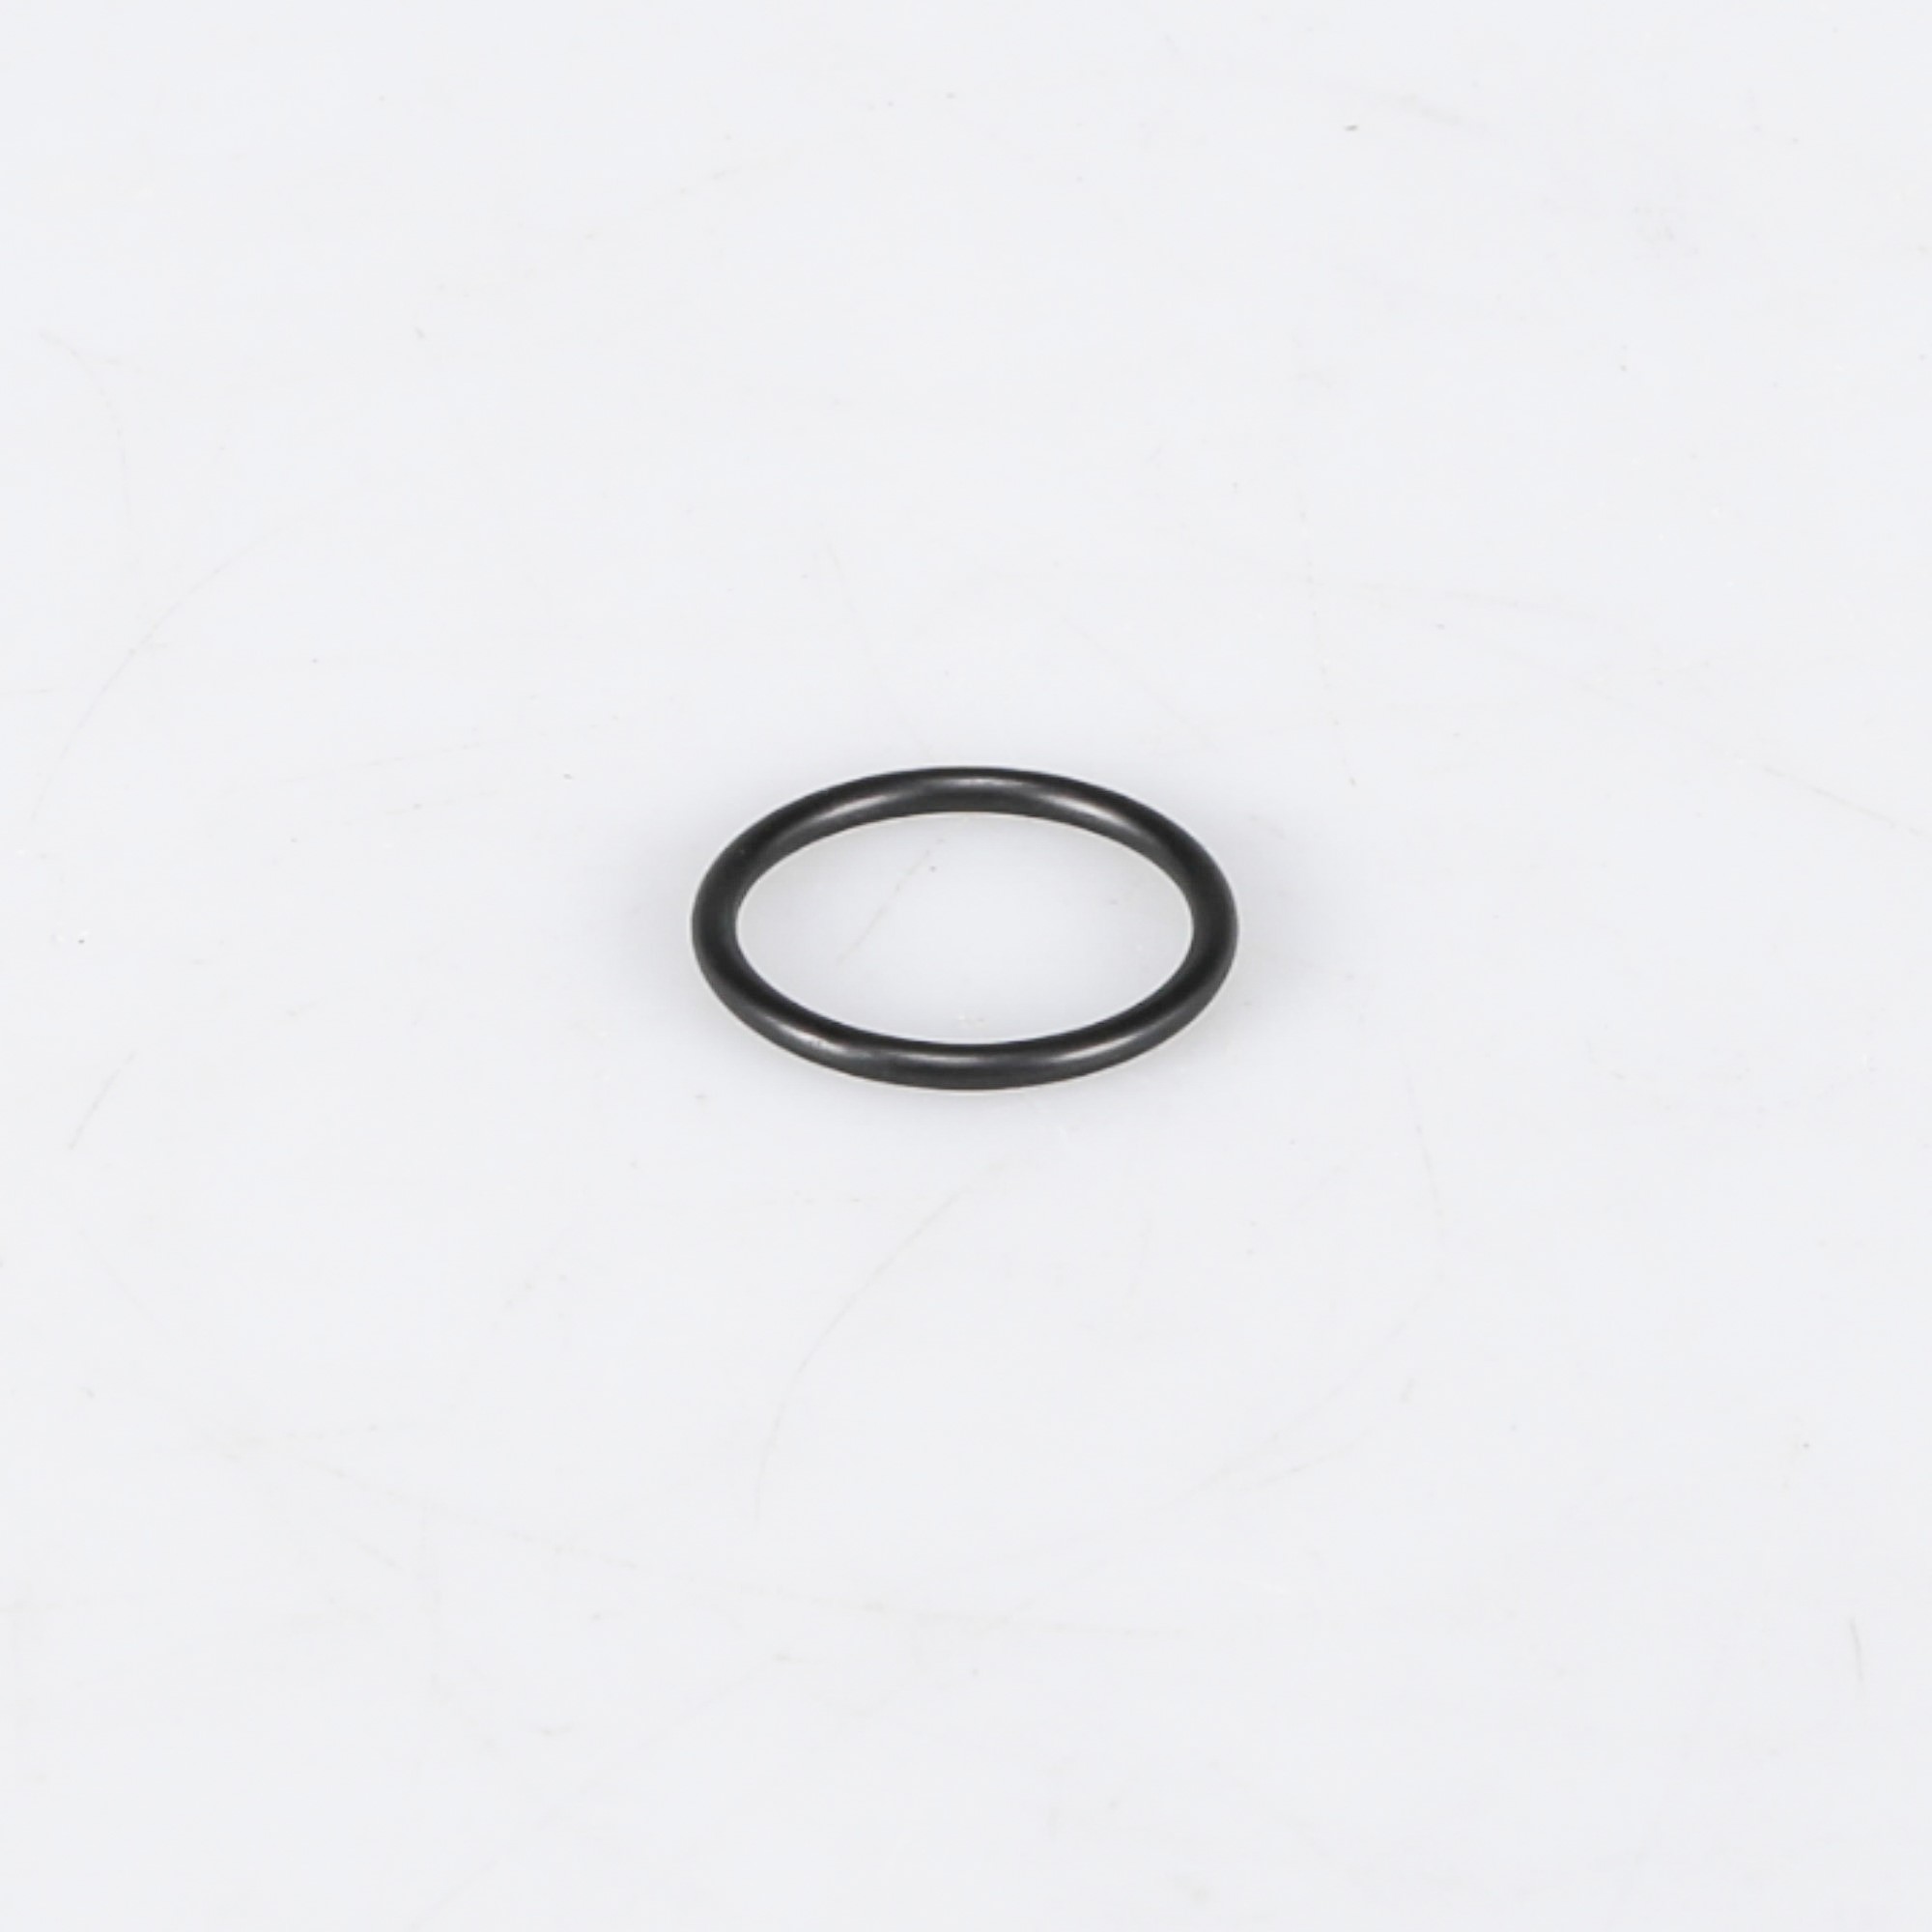 WH09X22745 GE Washer o-ring